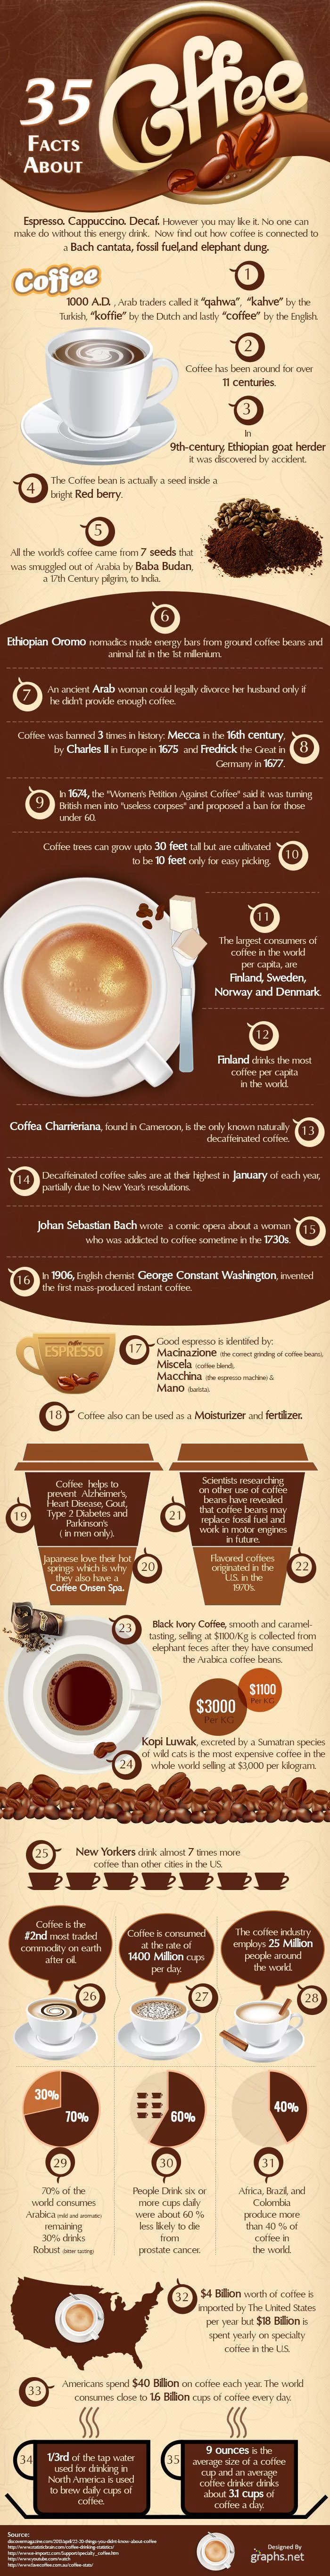 35 Facts About Coffee